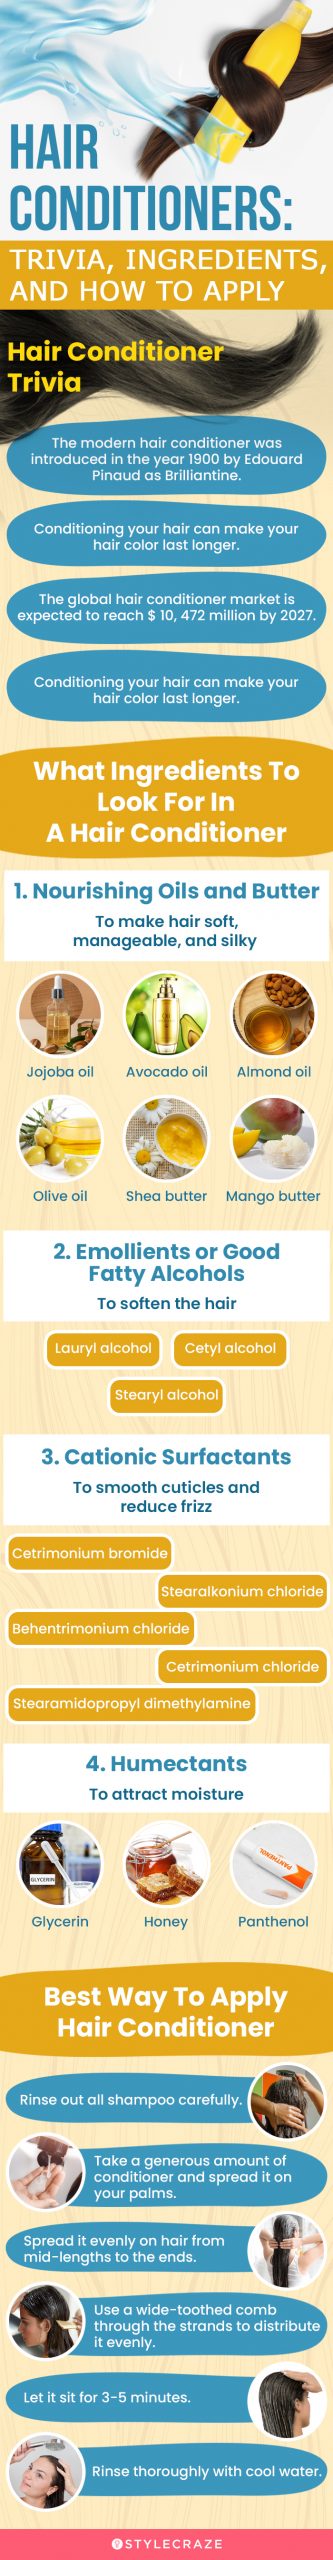  Best Way To Apply Hair Conditioner (infographic)